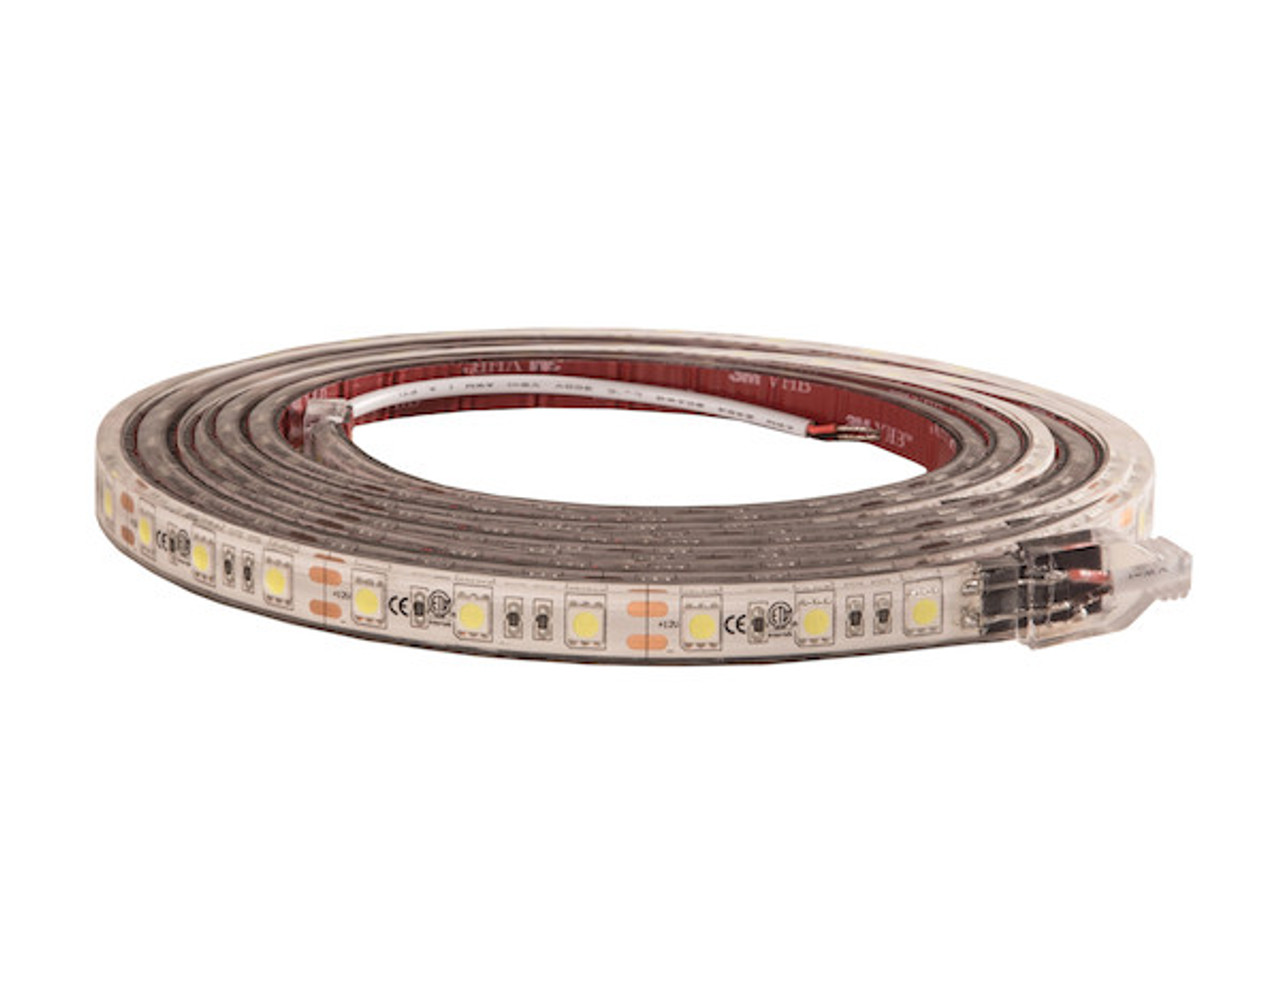 562133202 - 132 Inch 201-LED Strip Light with 3M® Adhesive Back - Clear And Cool